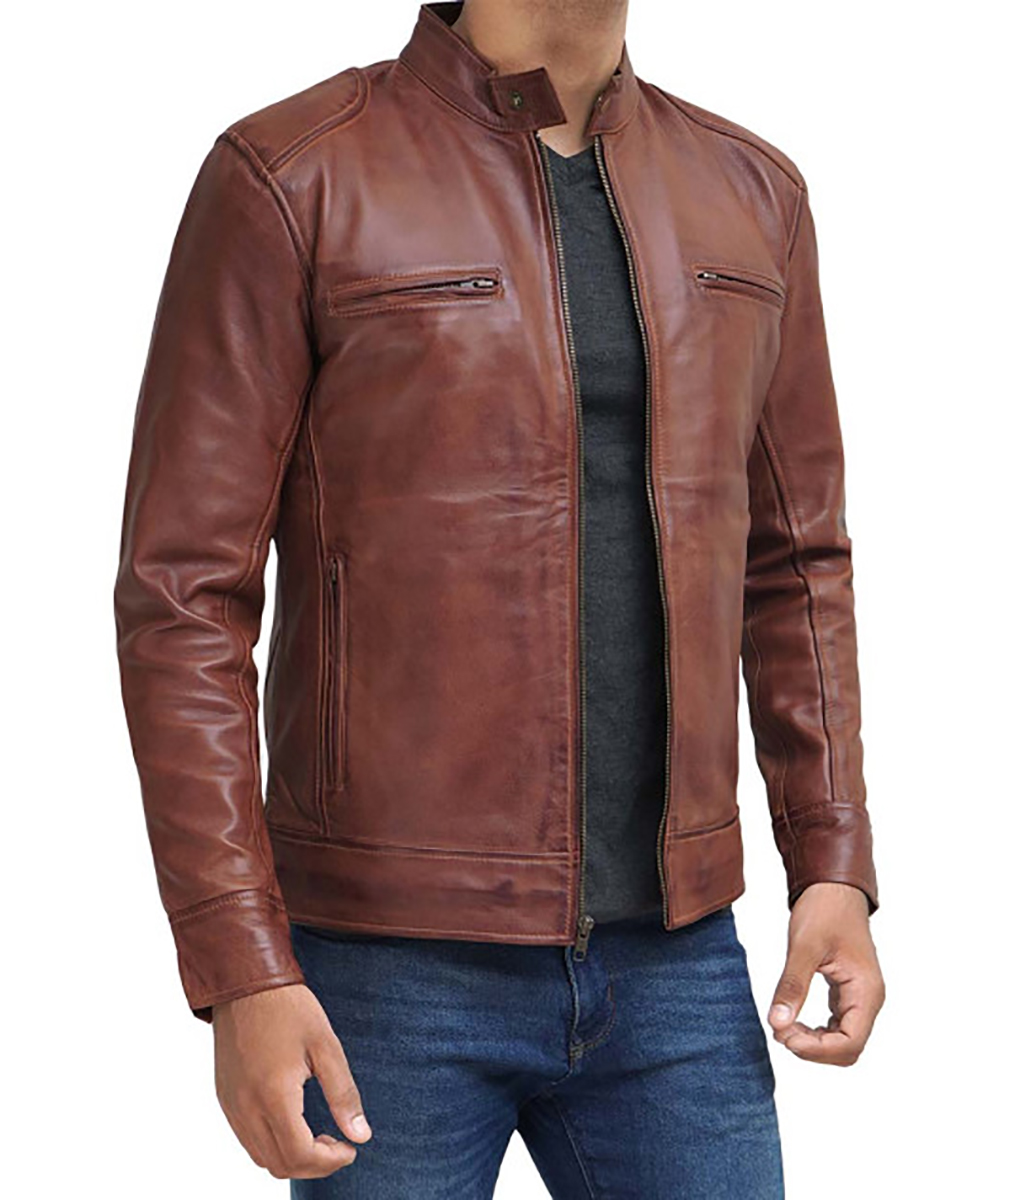 Garfield Mens Brown Cafe Racer Leather Jacket